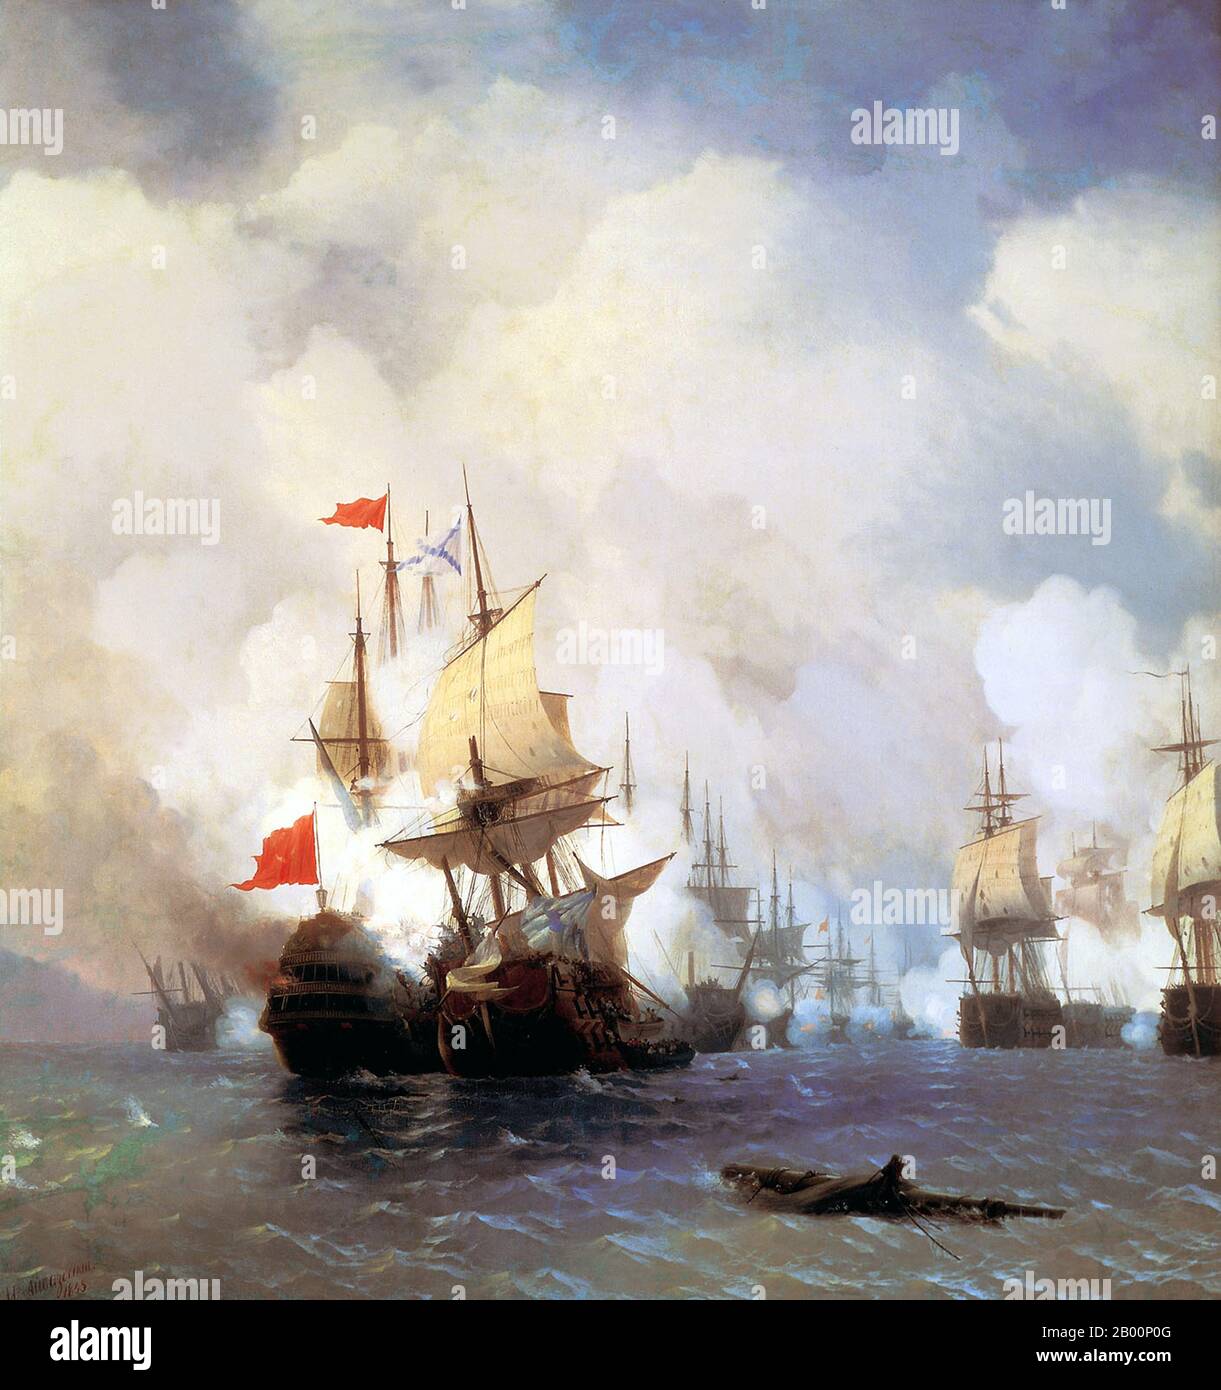 Turkey/Russia: 'Battle of Chios 24 June, 1770'. Oil on canvas painting by Ivan Aivazovsky (1817-1900), 1848.  This painting depicts the duel between the Turkish flagship Real Mustafa and Russian admiral Spiridov’s ship Svyatoy Evstafiy (68). During the boarding action the burning debris of the Turkish ship set the Russian flagship on fire and soon she blew up. The Russian admiral escaped the explosion just minutes before. Ten minutes later Real Mustafa exploded too. The Turkish squadron retreated to the Bay of Chesma only to be destroyed there in the next two days during the Battle of Chesma. Stock Photo